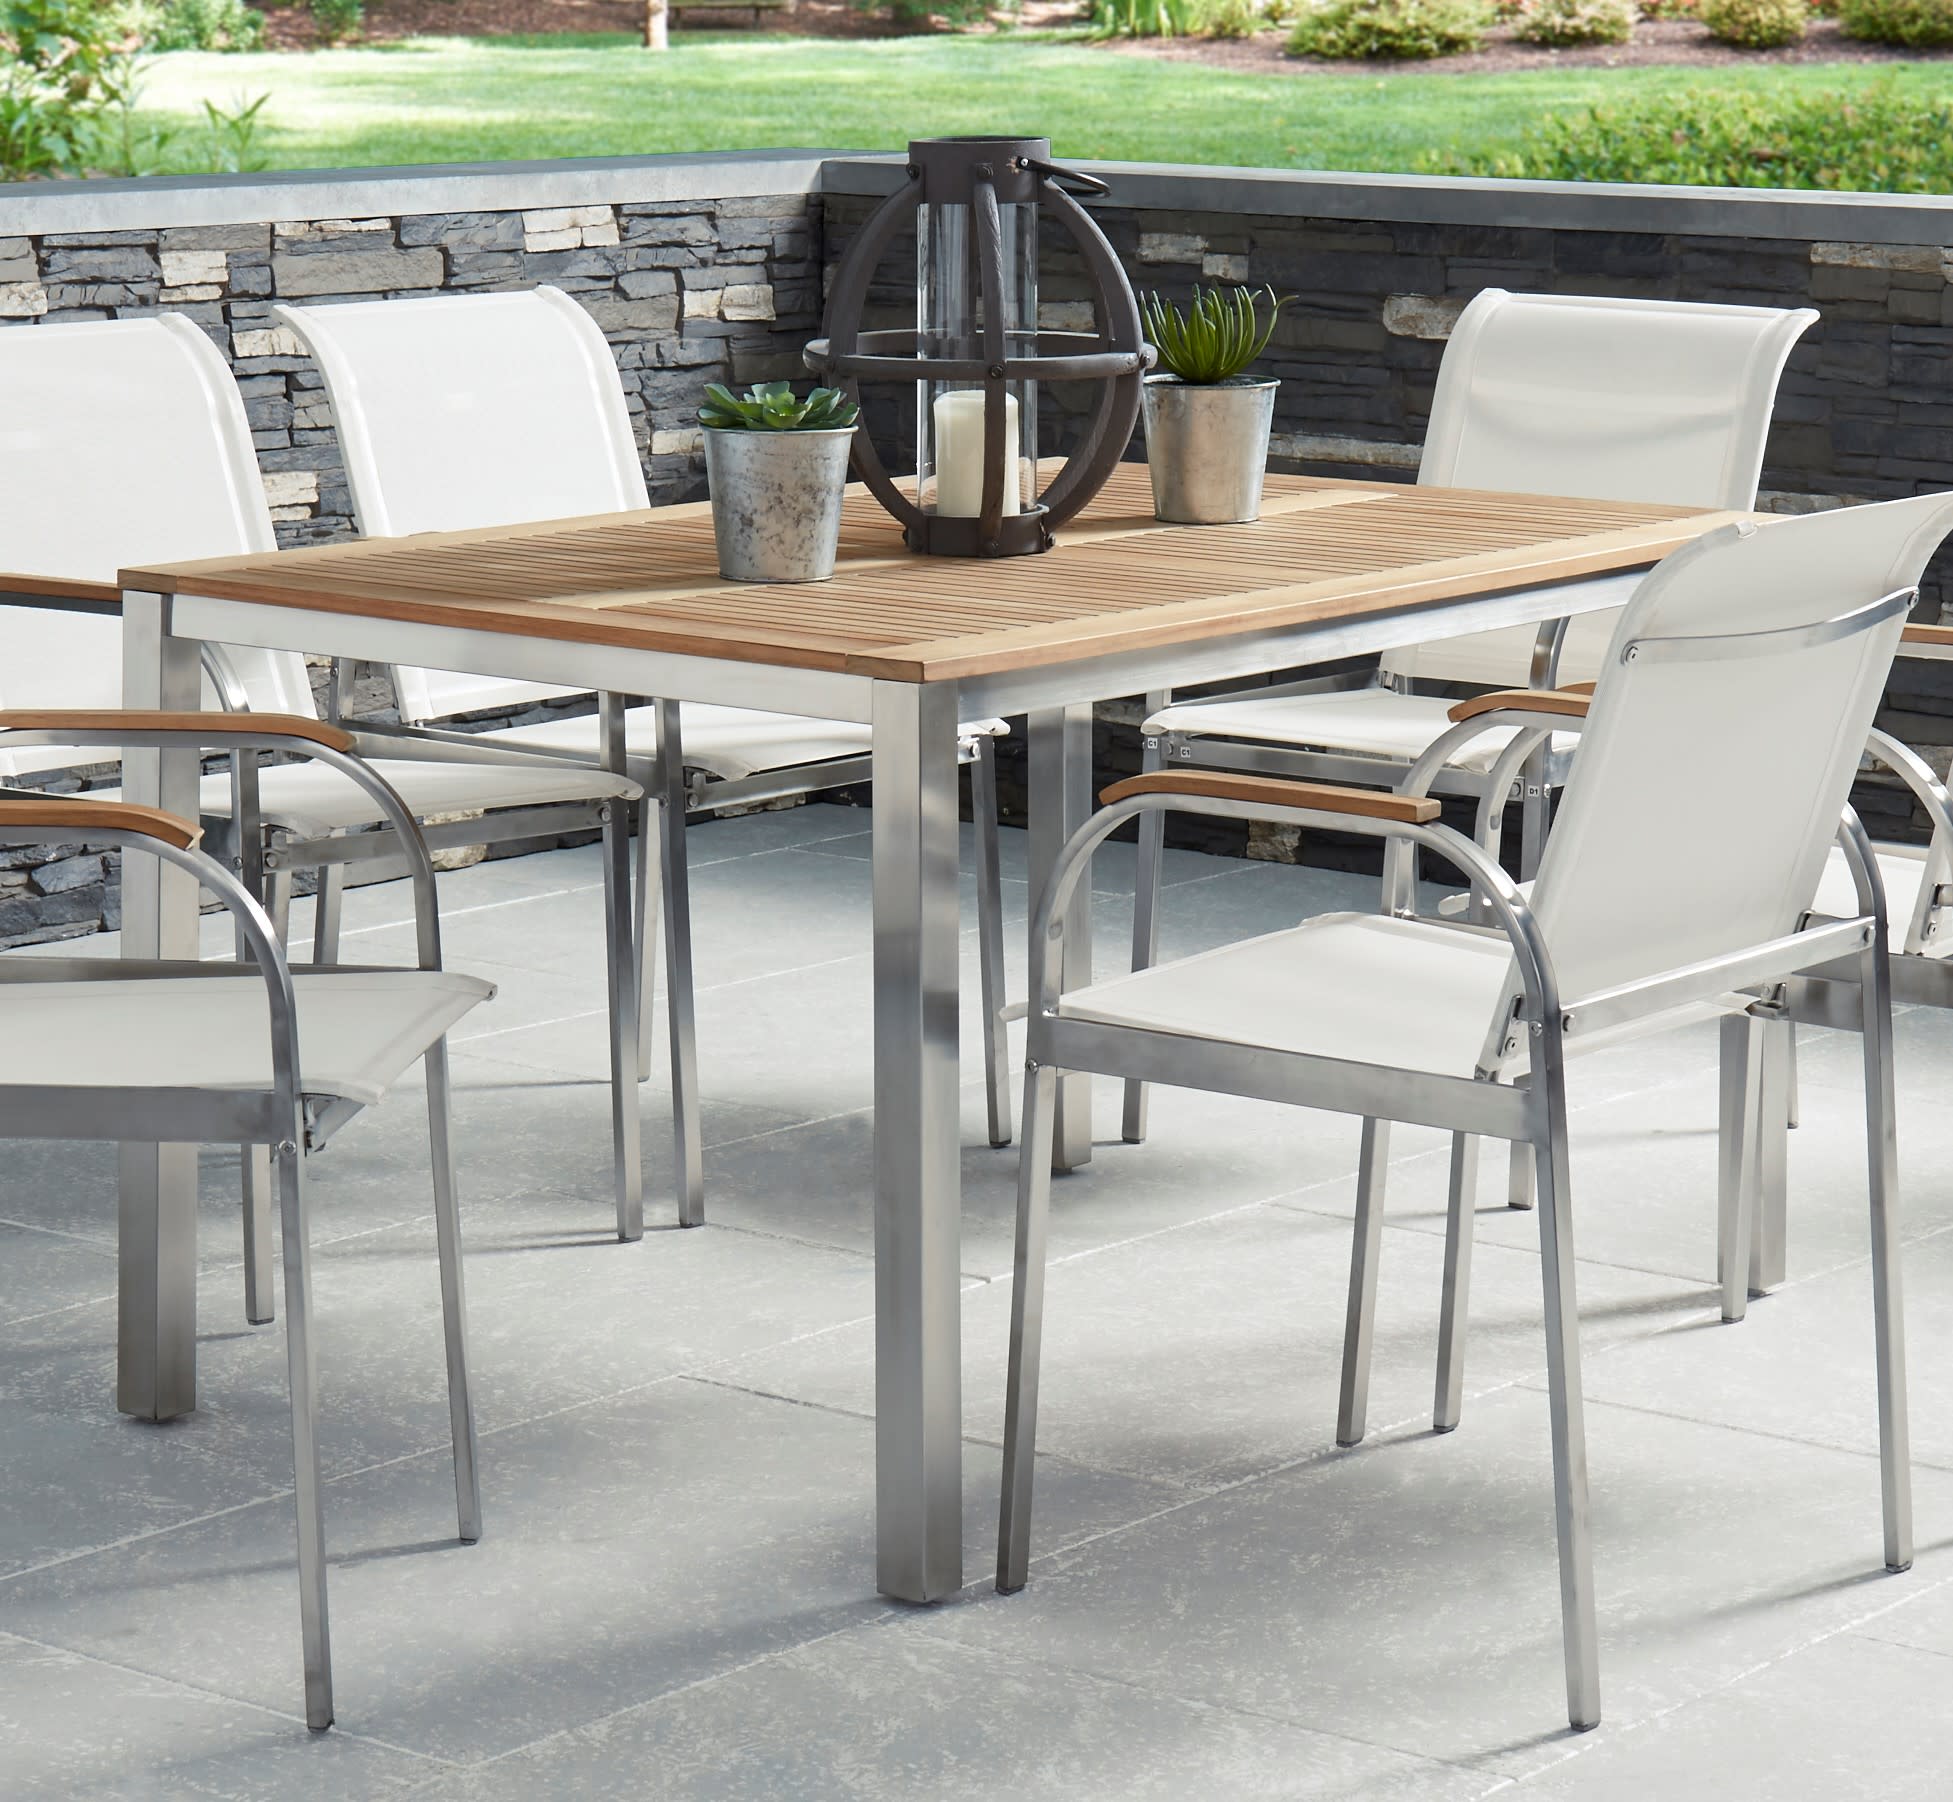 Aruba Outdoor Dining Table by Homestyles - Brown - Wood, Stainless Steel - 5650-37